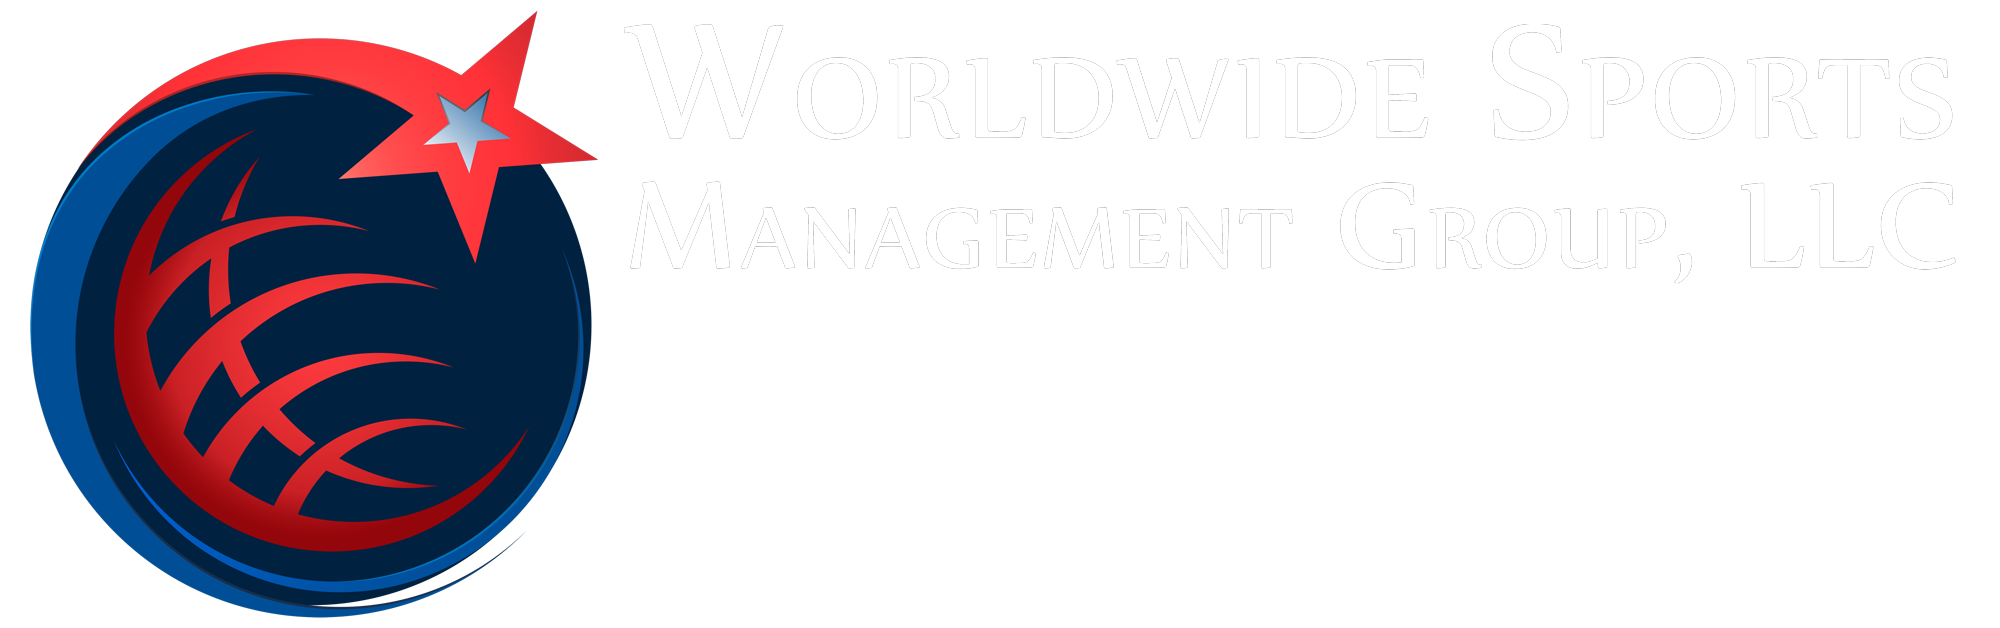 World Wide Sports Management Group